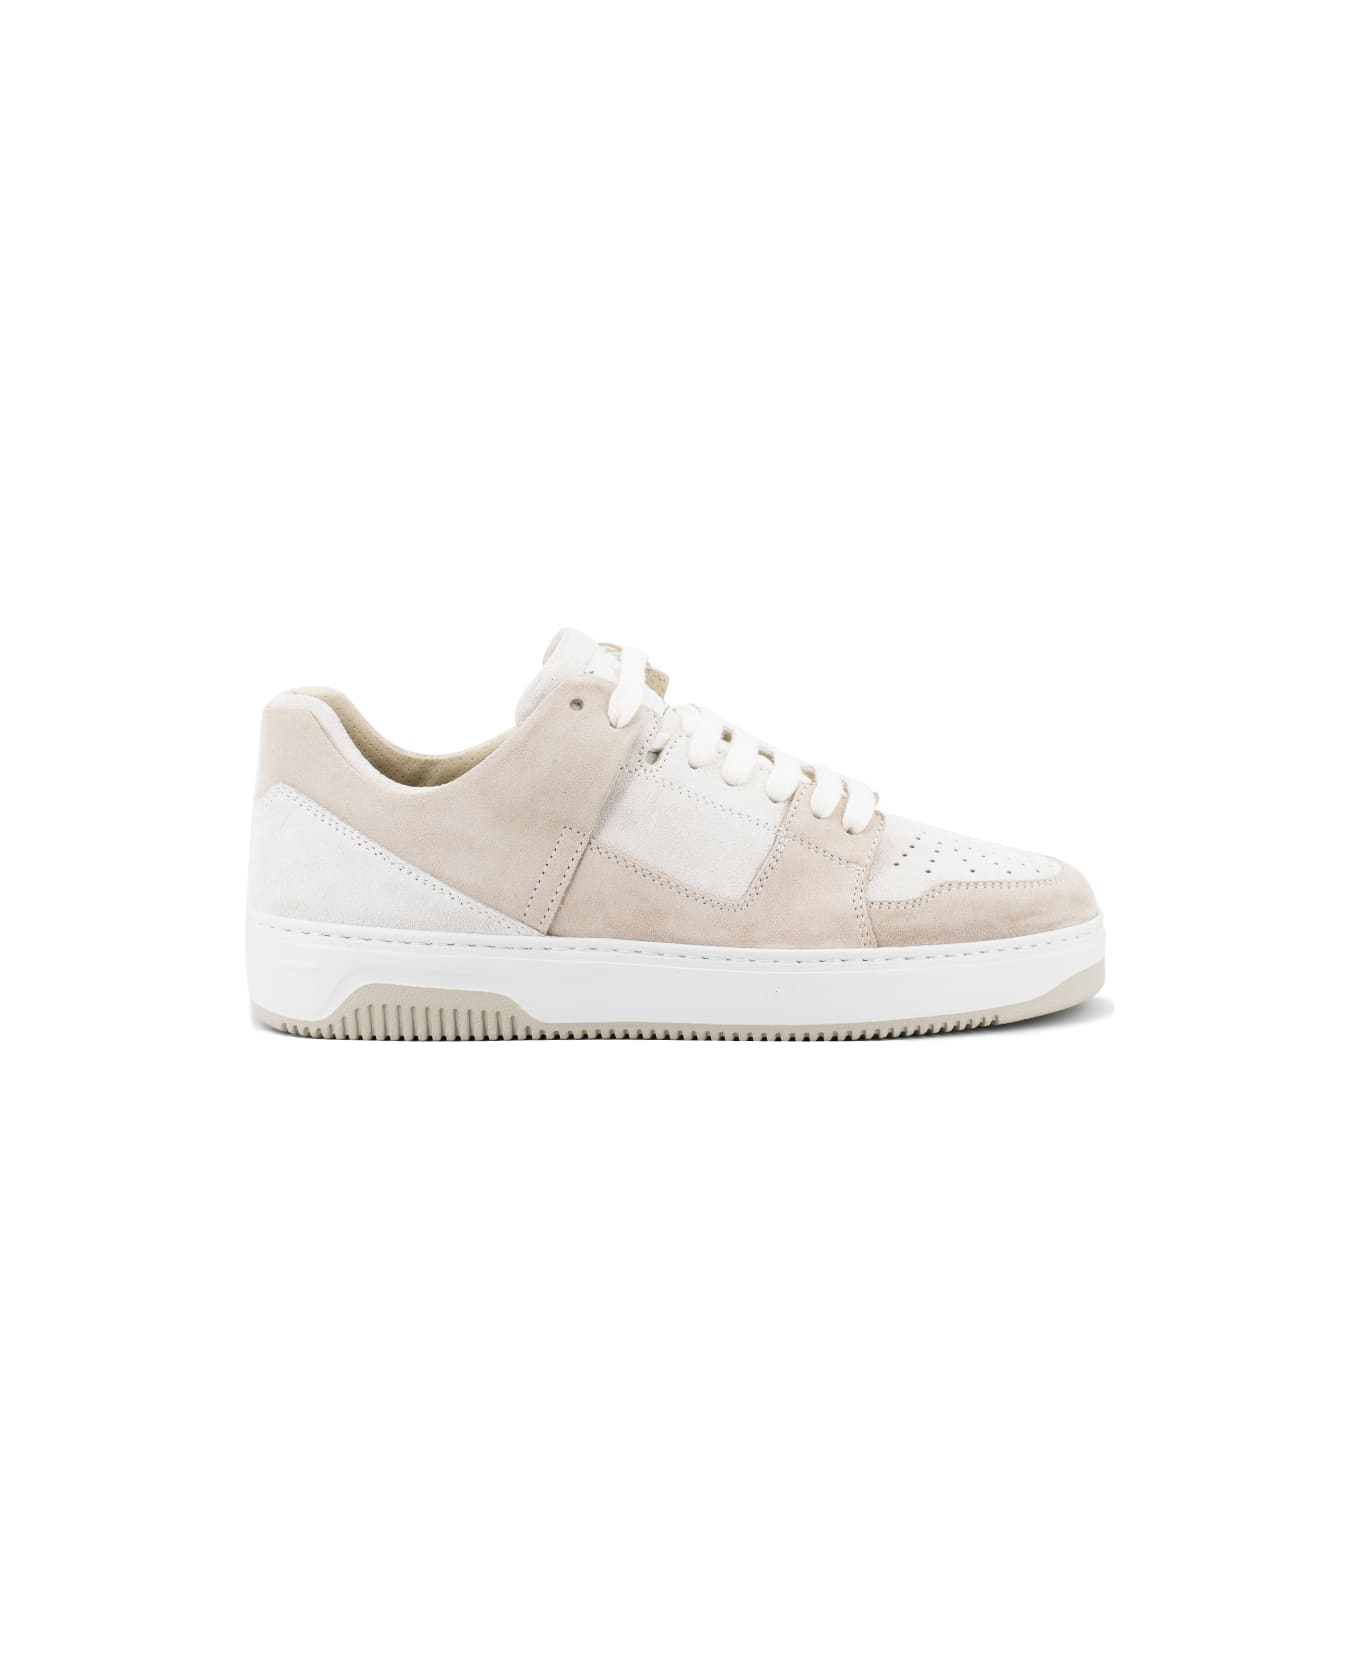 Eleventy Sneakers - SAND AND WHITE